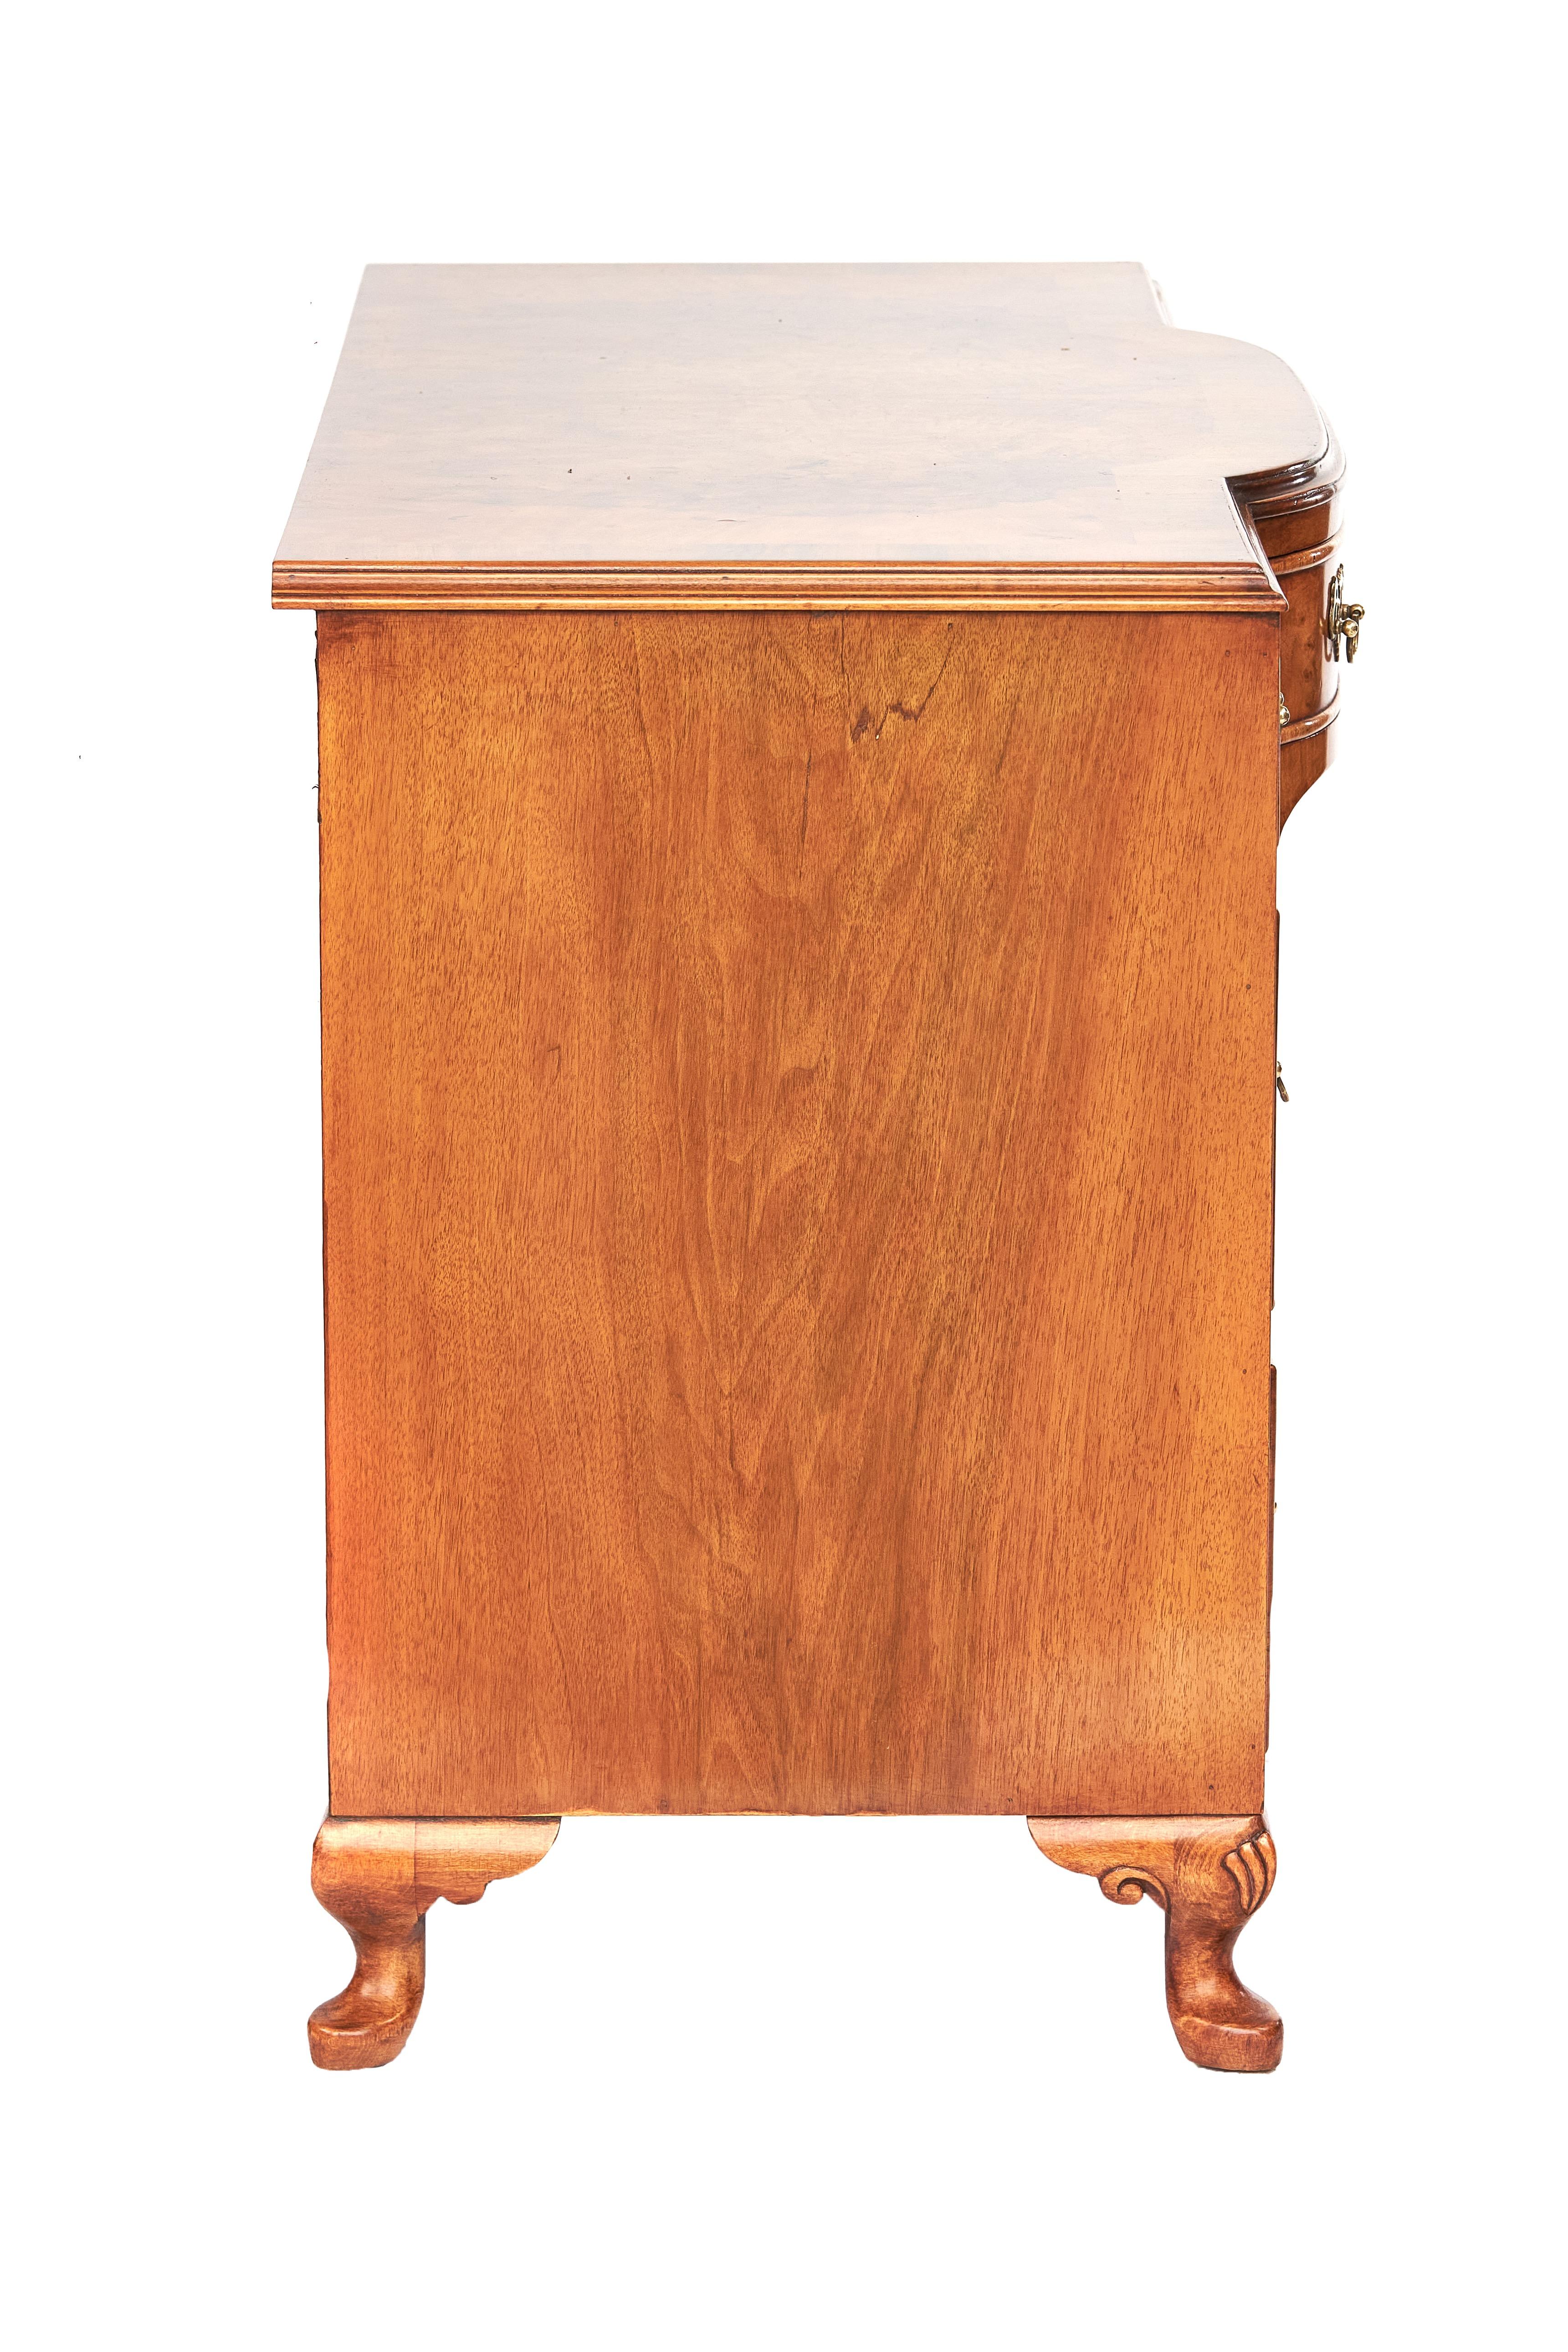 Walnut Queen Anne Style Kneehole Burr Walnut Dressing Table with Stool For Sale 4